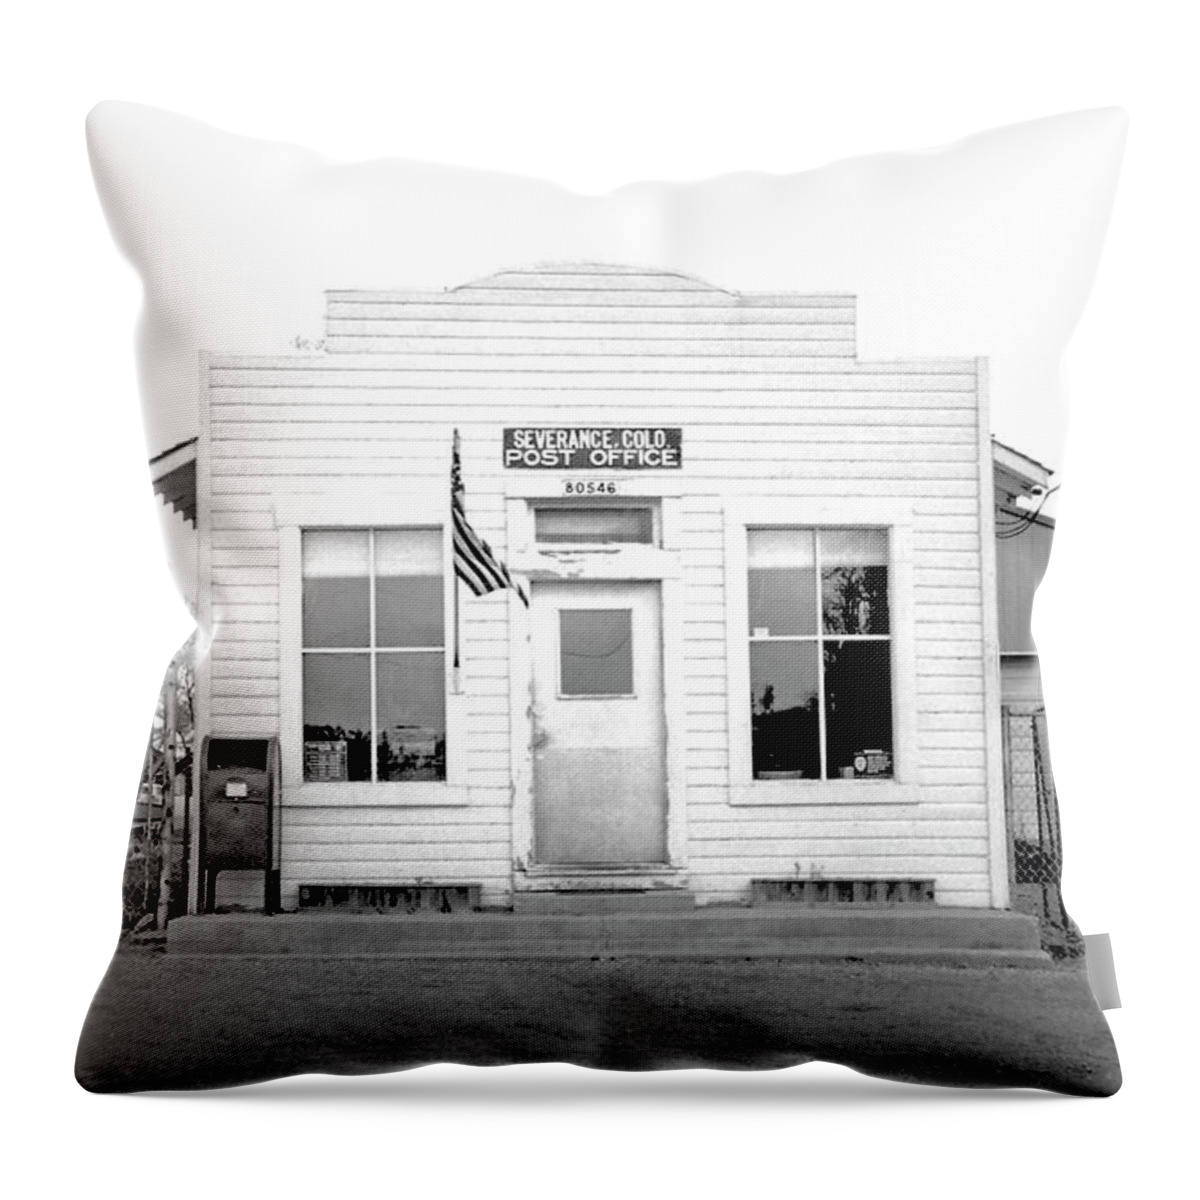 Post Office Throw Pillow featuring the photograph Post Office, Severance, Colorado 80546 by Jerry Griffin